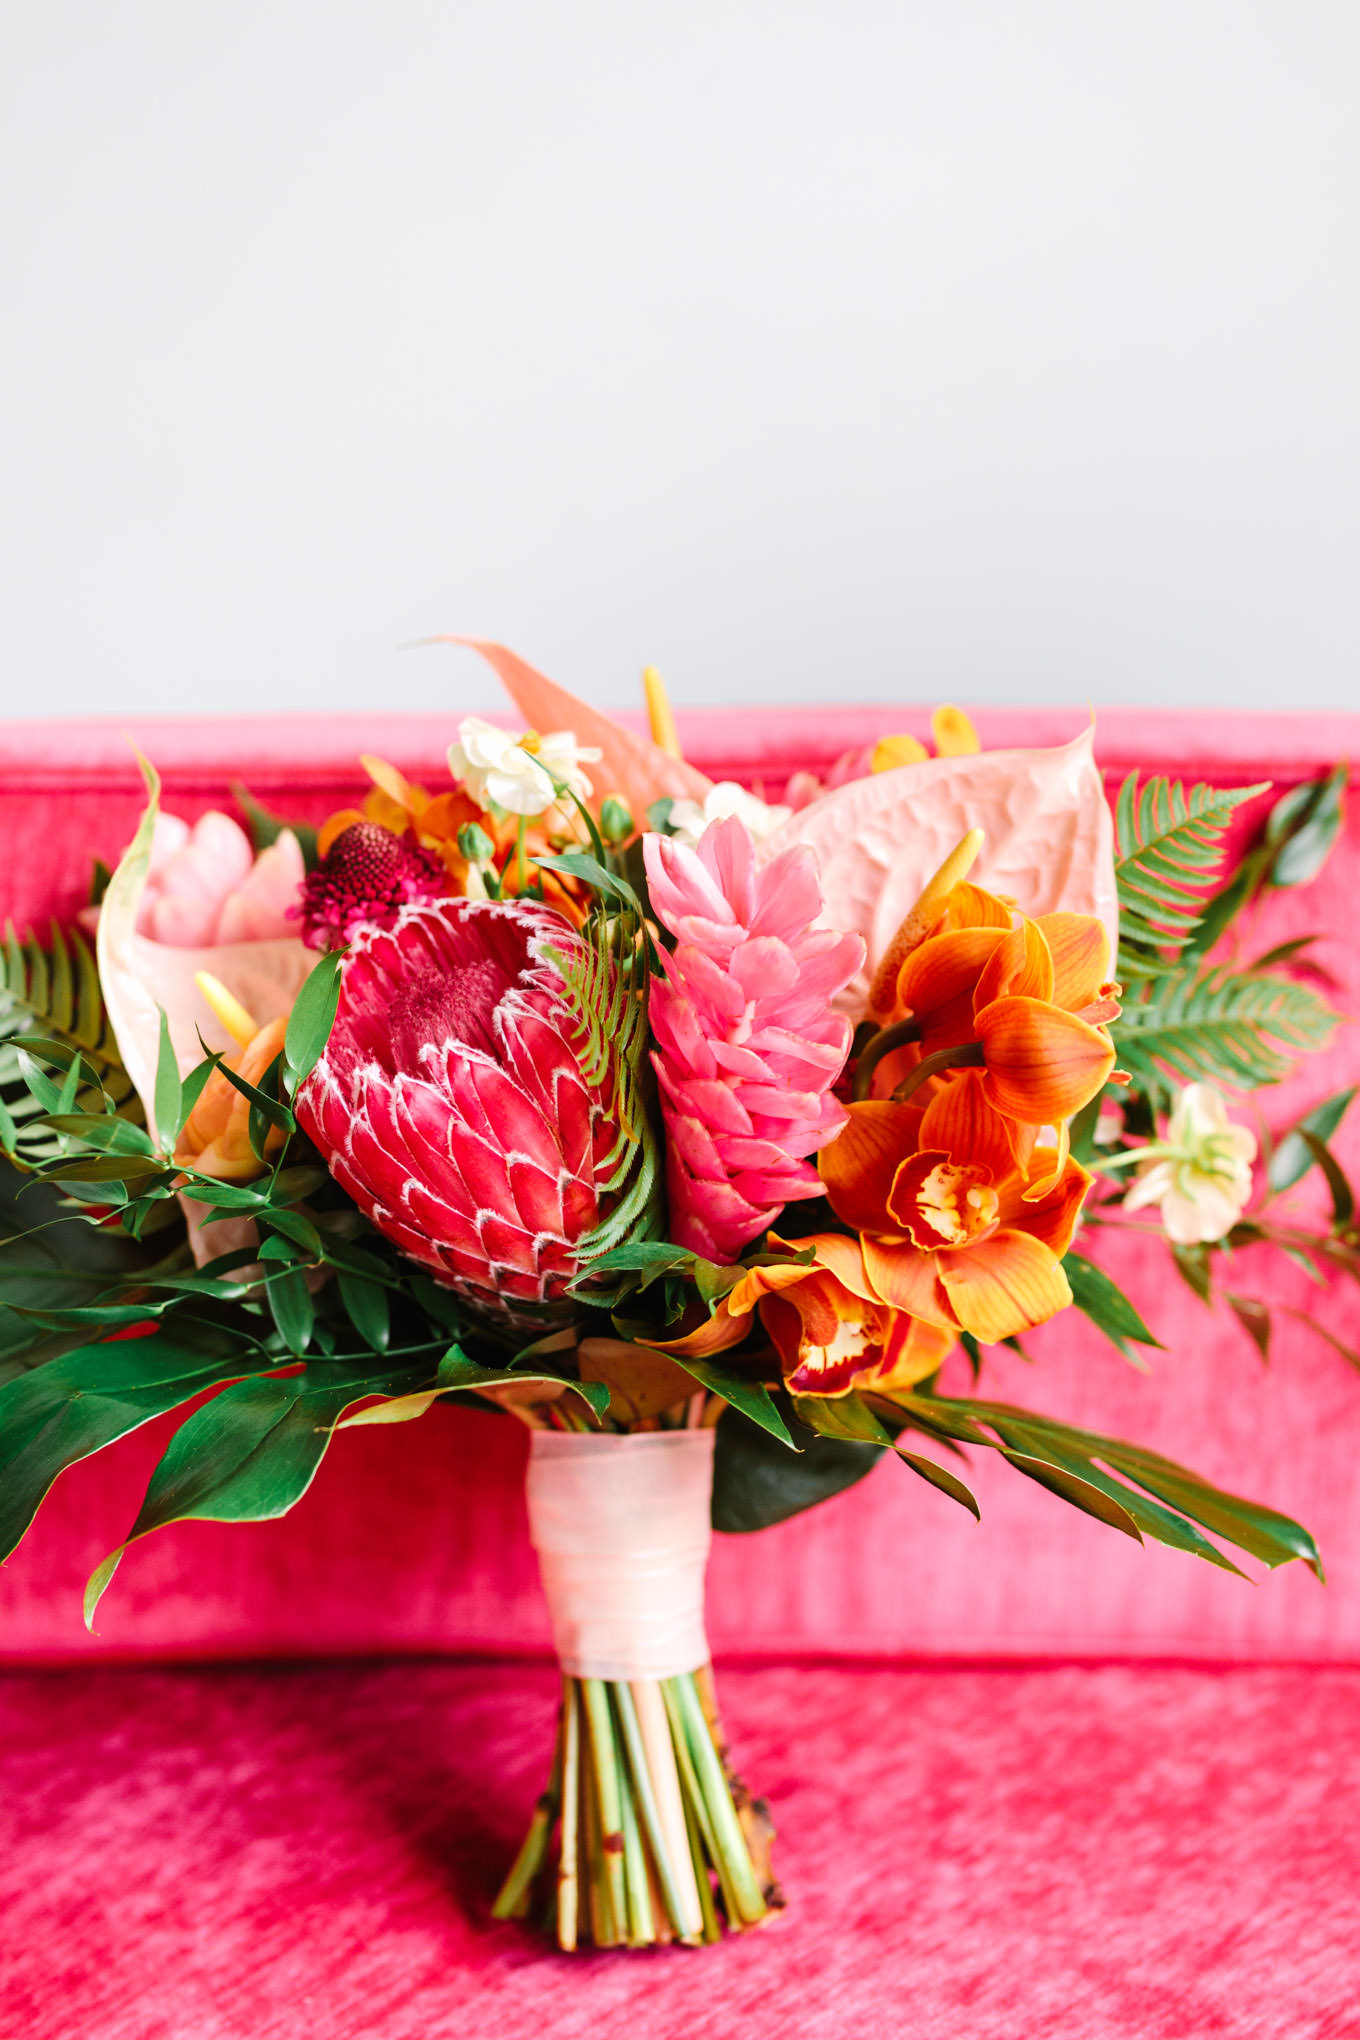 Pink tropical wedding bouquet | TV inspired wedding at The Fig House Los Angeles | Published on The Knot | Fresh and colorful photography for fun-loving couples in Southern California | #losangeleswedding #TVwedding #colorfulwedding #theknot   Source: Mary Costa Photography | Los Angeles wedding photographer